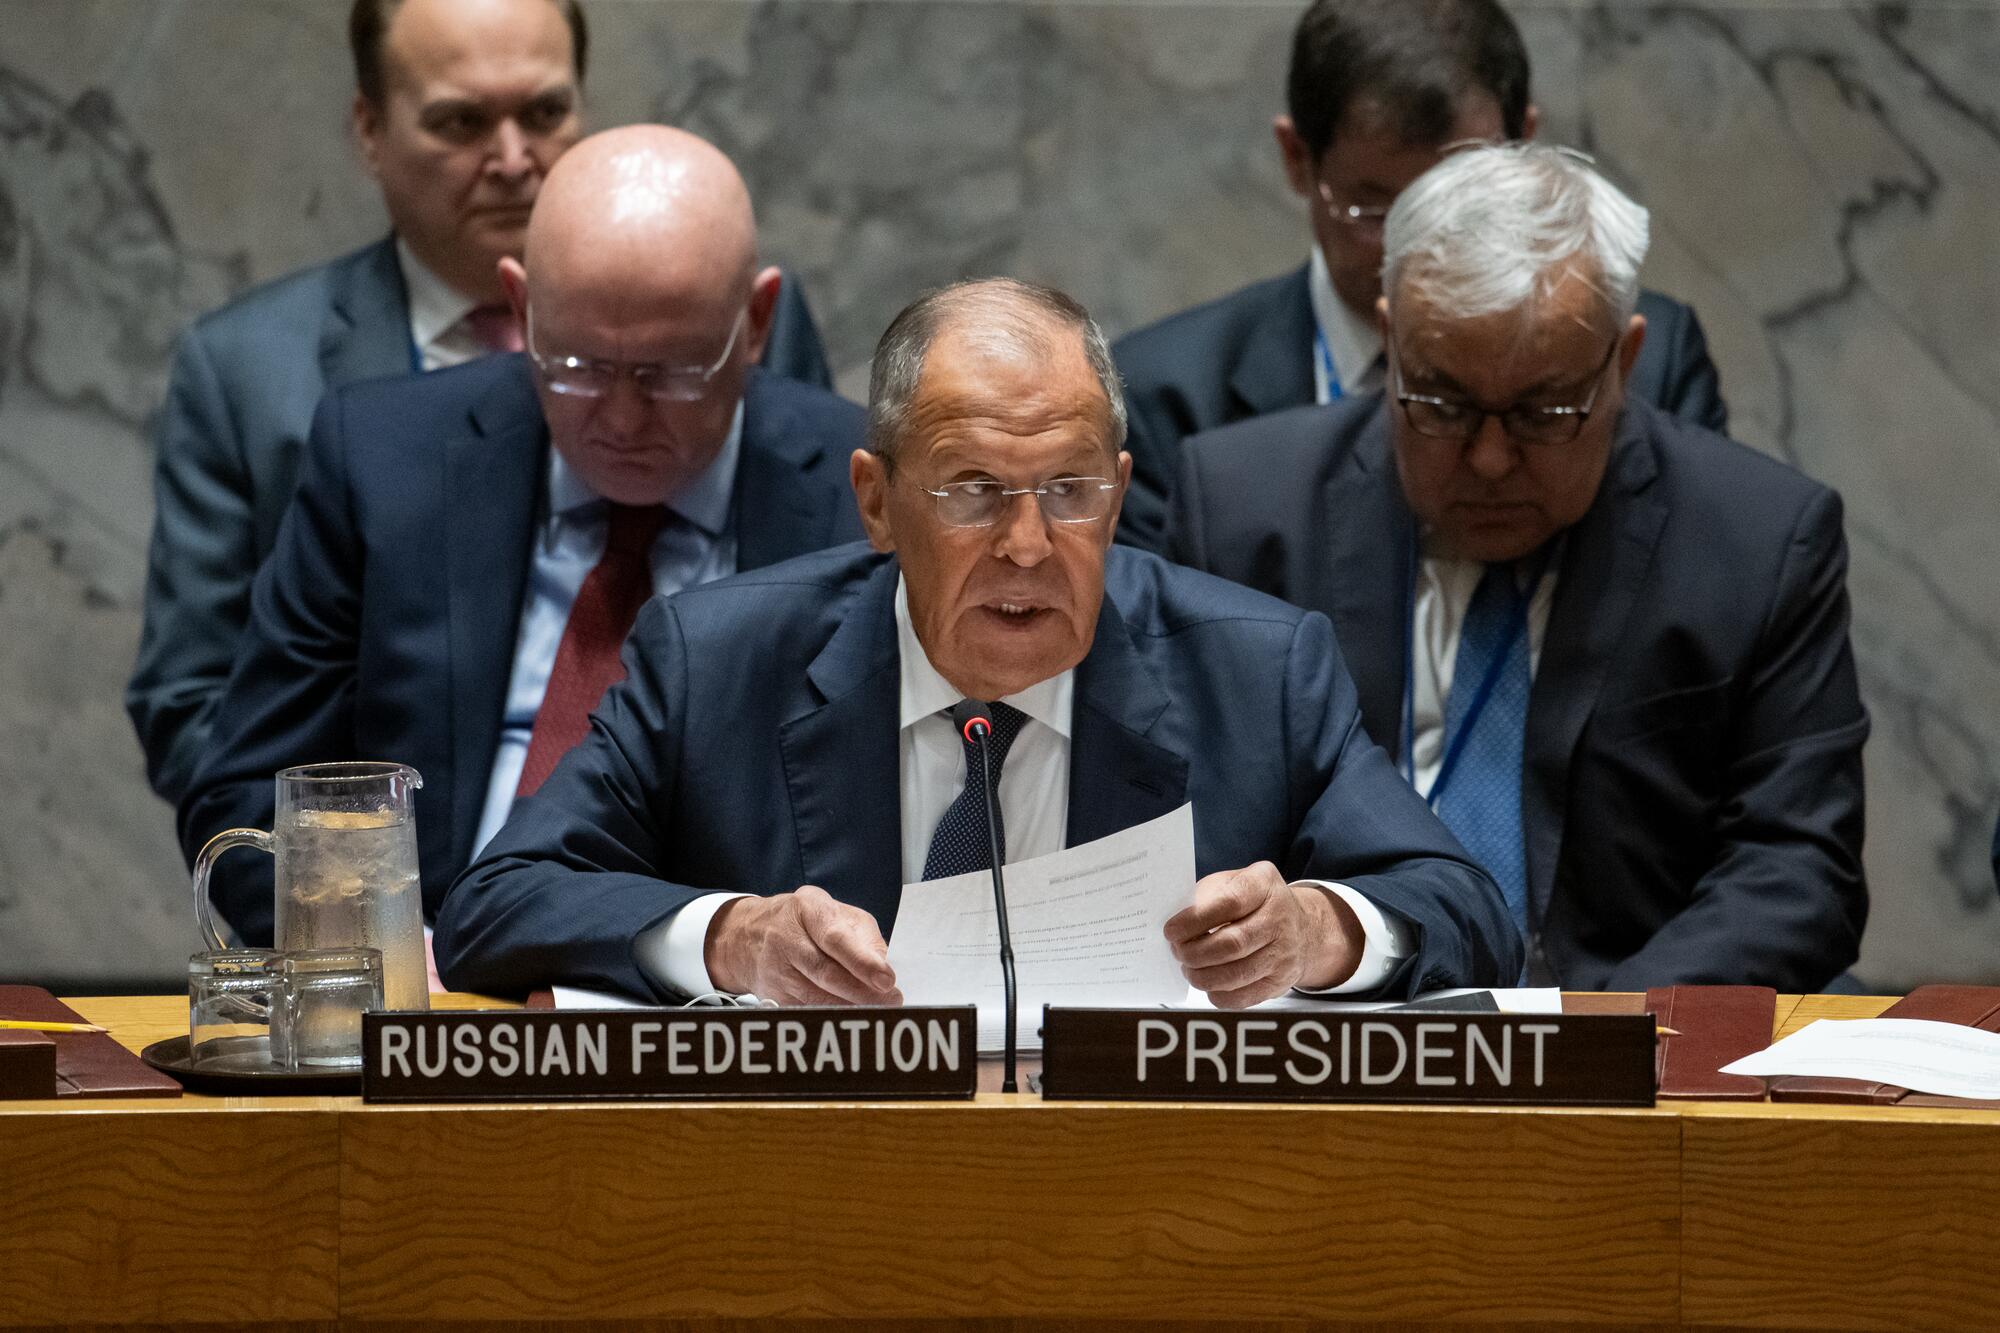 Sergey Lavrov, Minister for Foreign Affairs of Russian Federation and President of the Security Council for the month of July, chairs the Security Council meeting on maintenance of international peace and security, on the theme "Multilateral cooperation in the interest of a more just, democratic and sustainable world order".